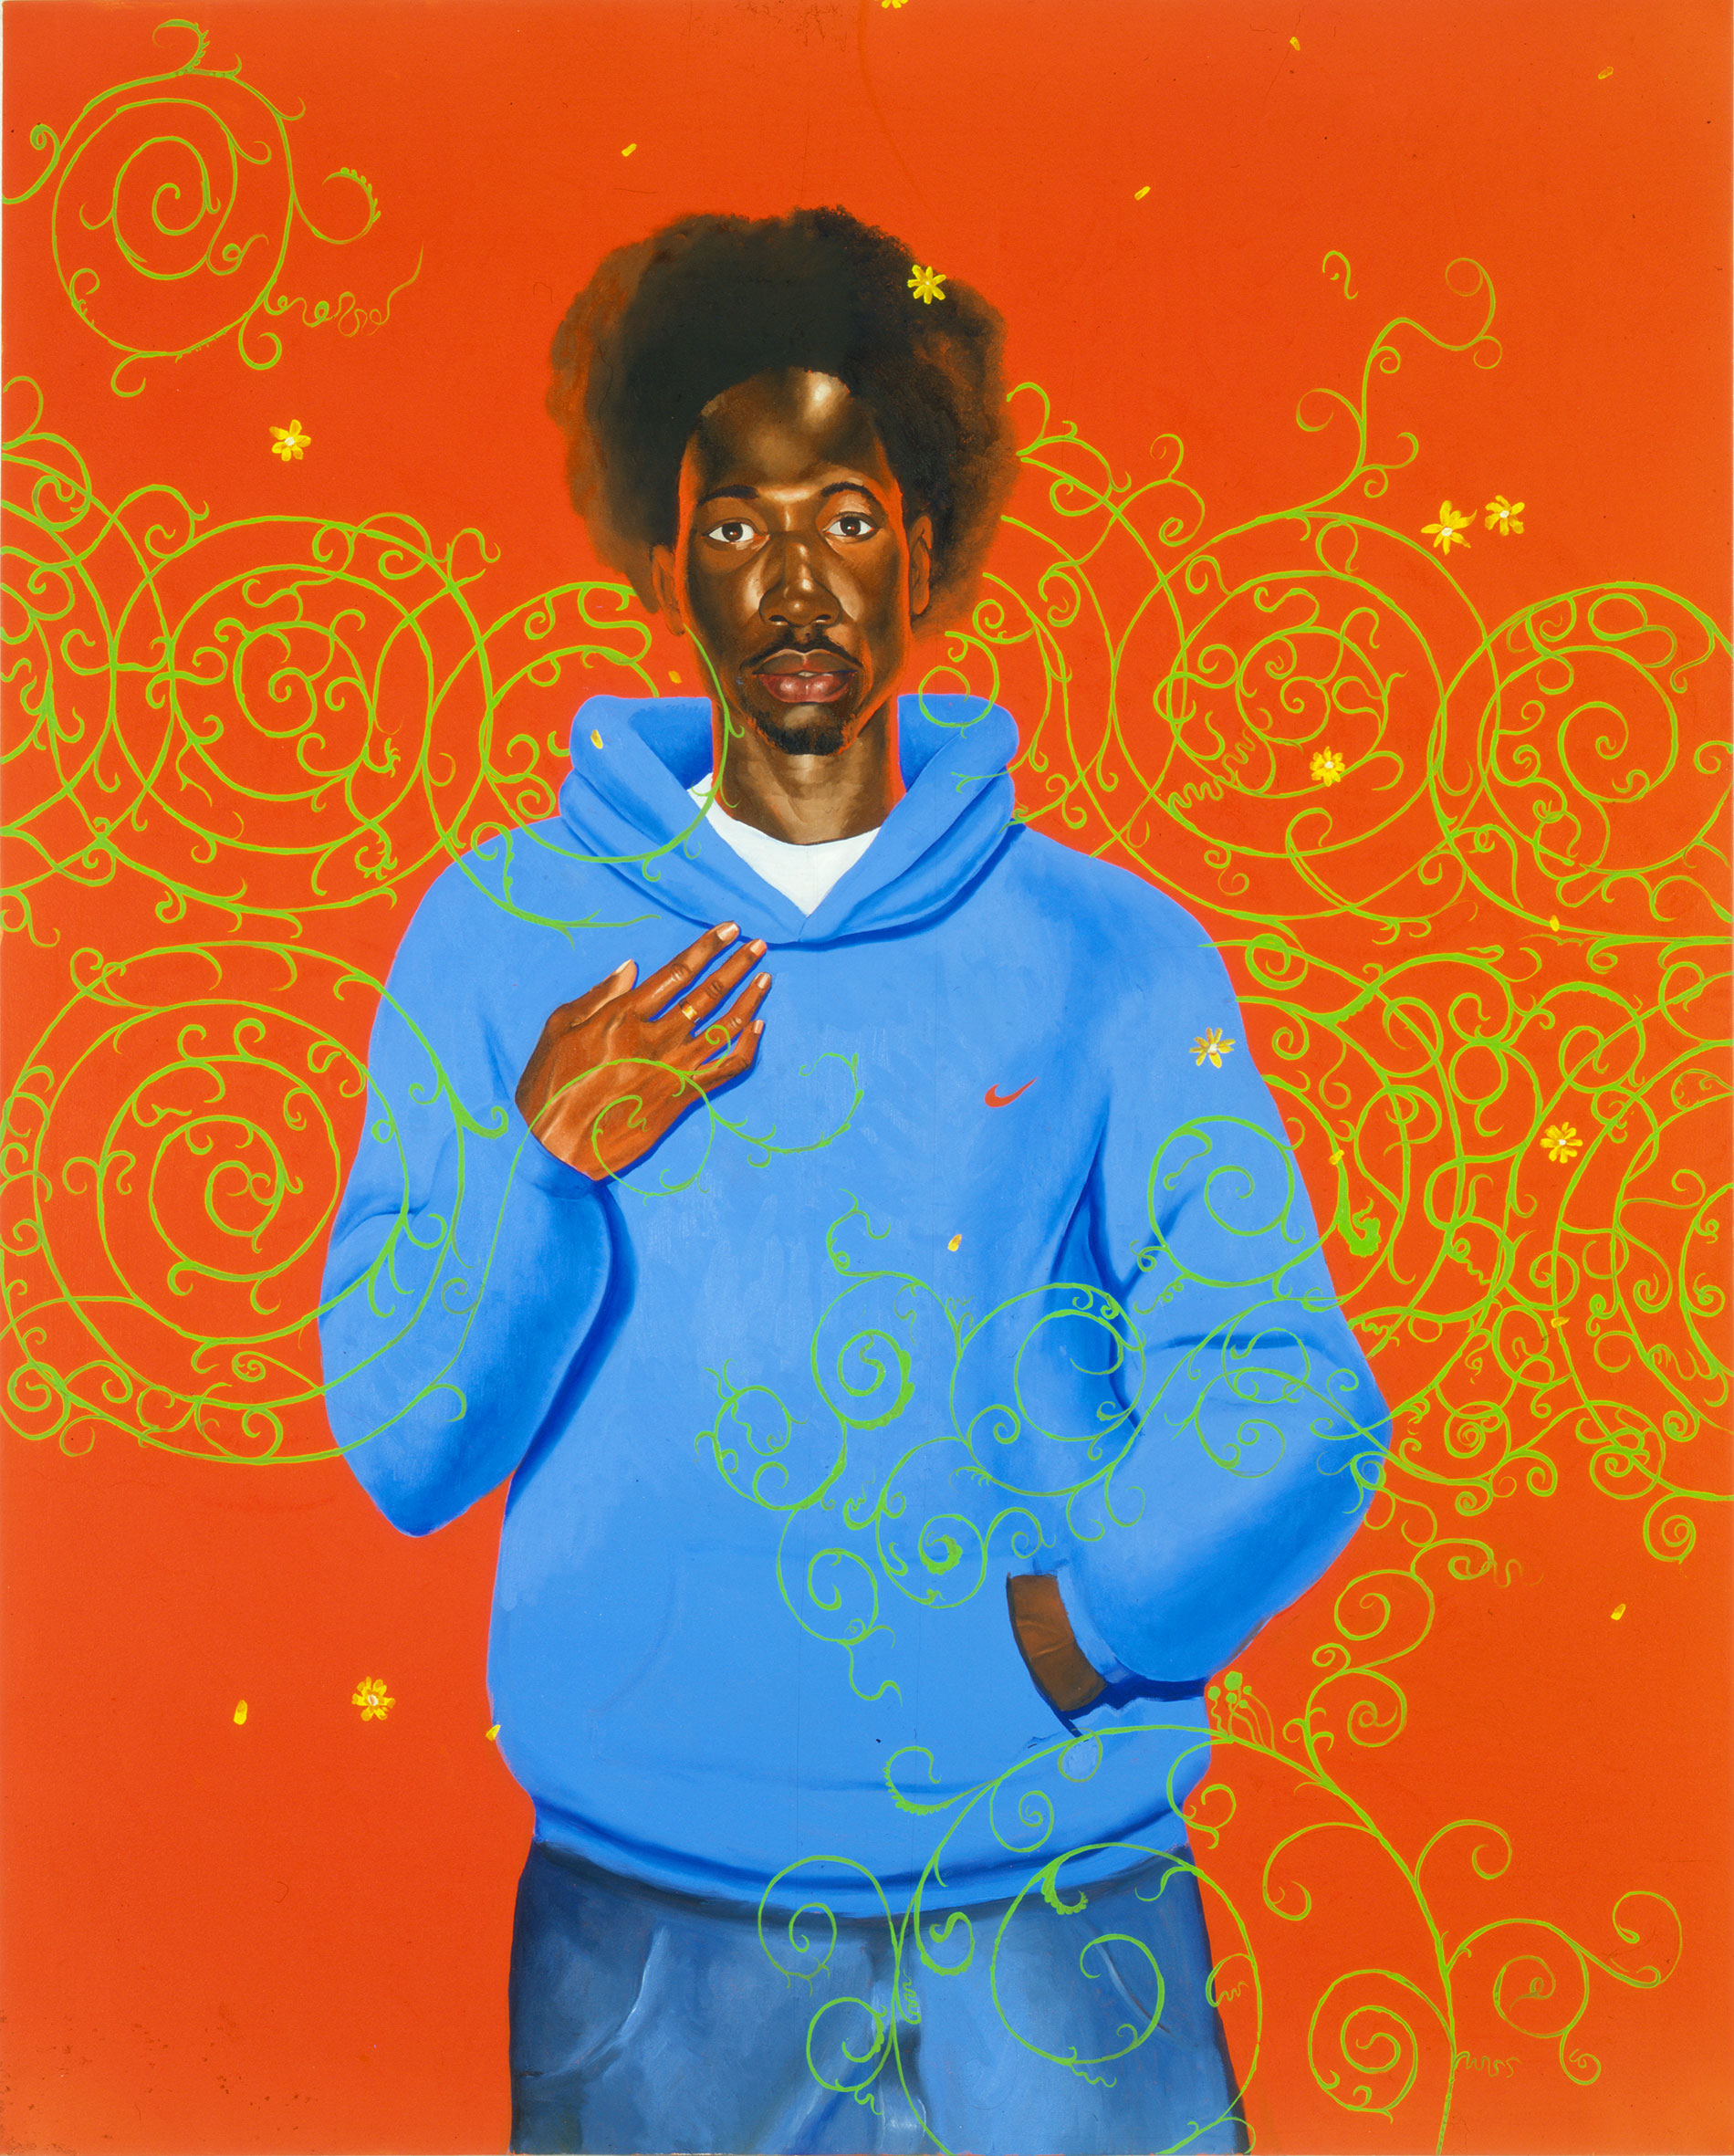 Kehinde Wiley | Passing / Posing  | Passing / Posing Untitled, 2001 Oil on Fabric. | 3